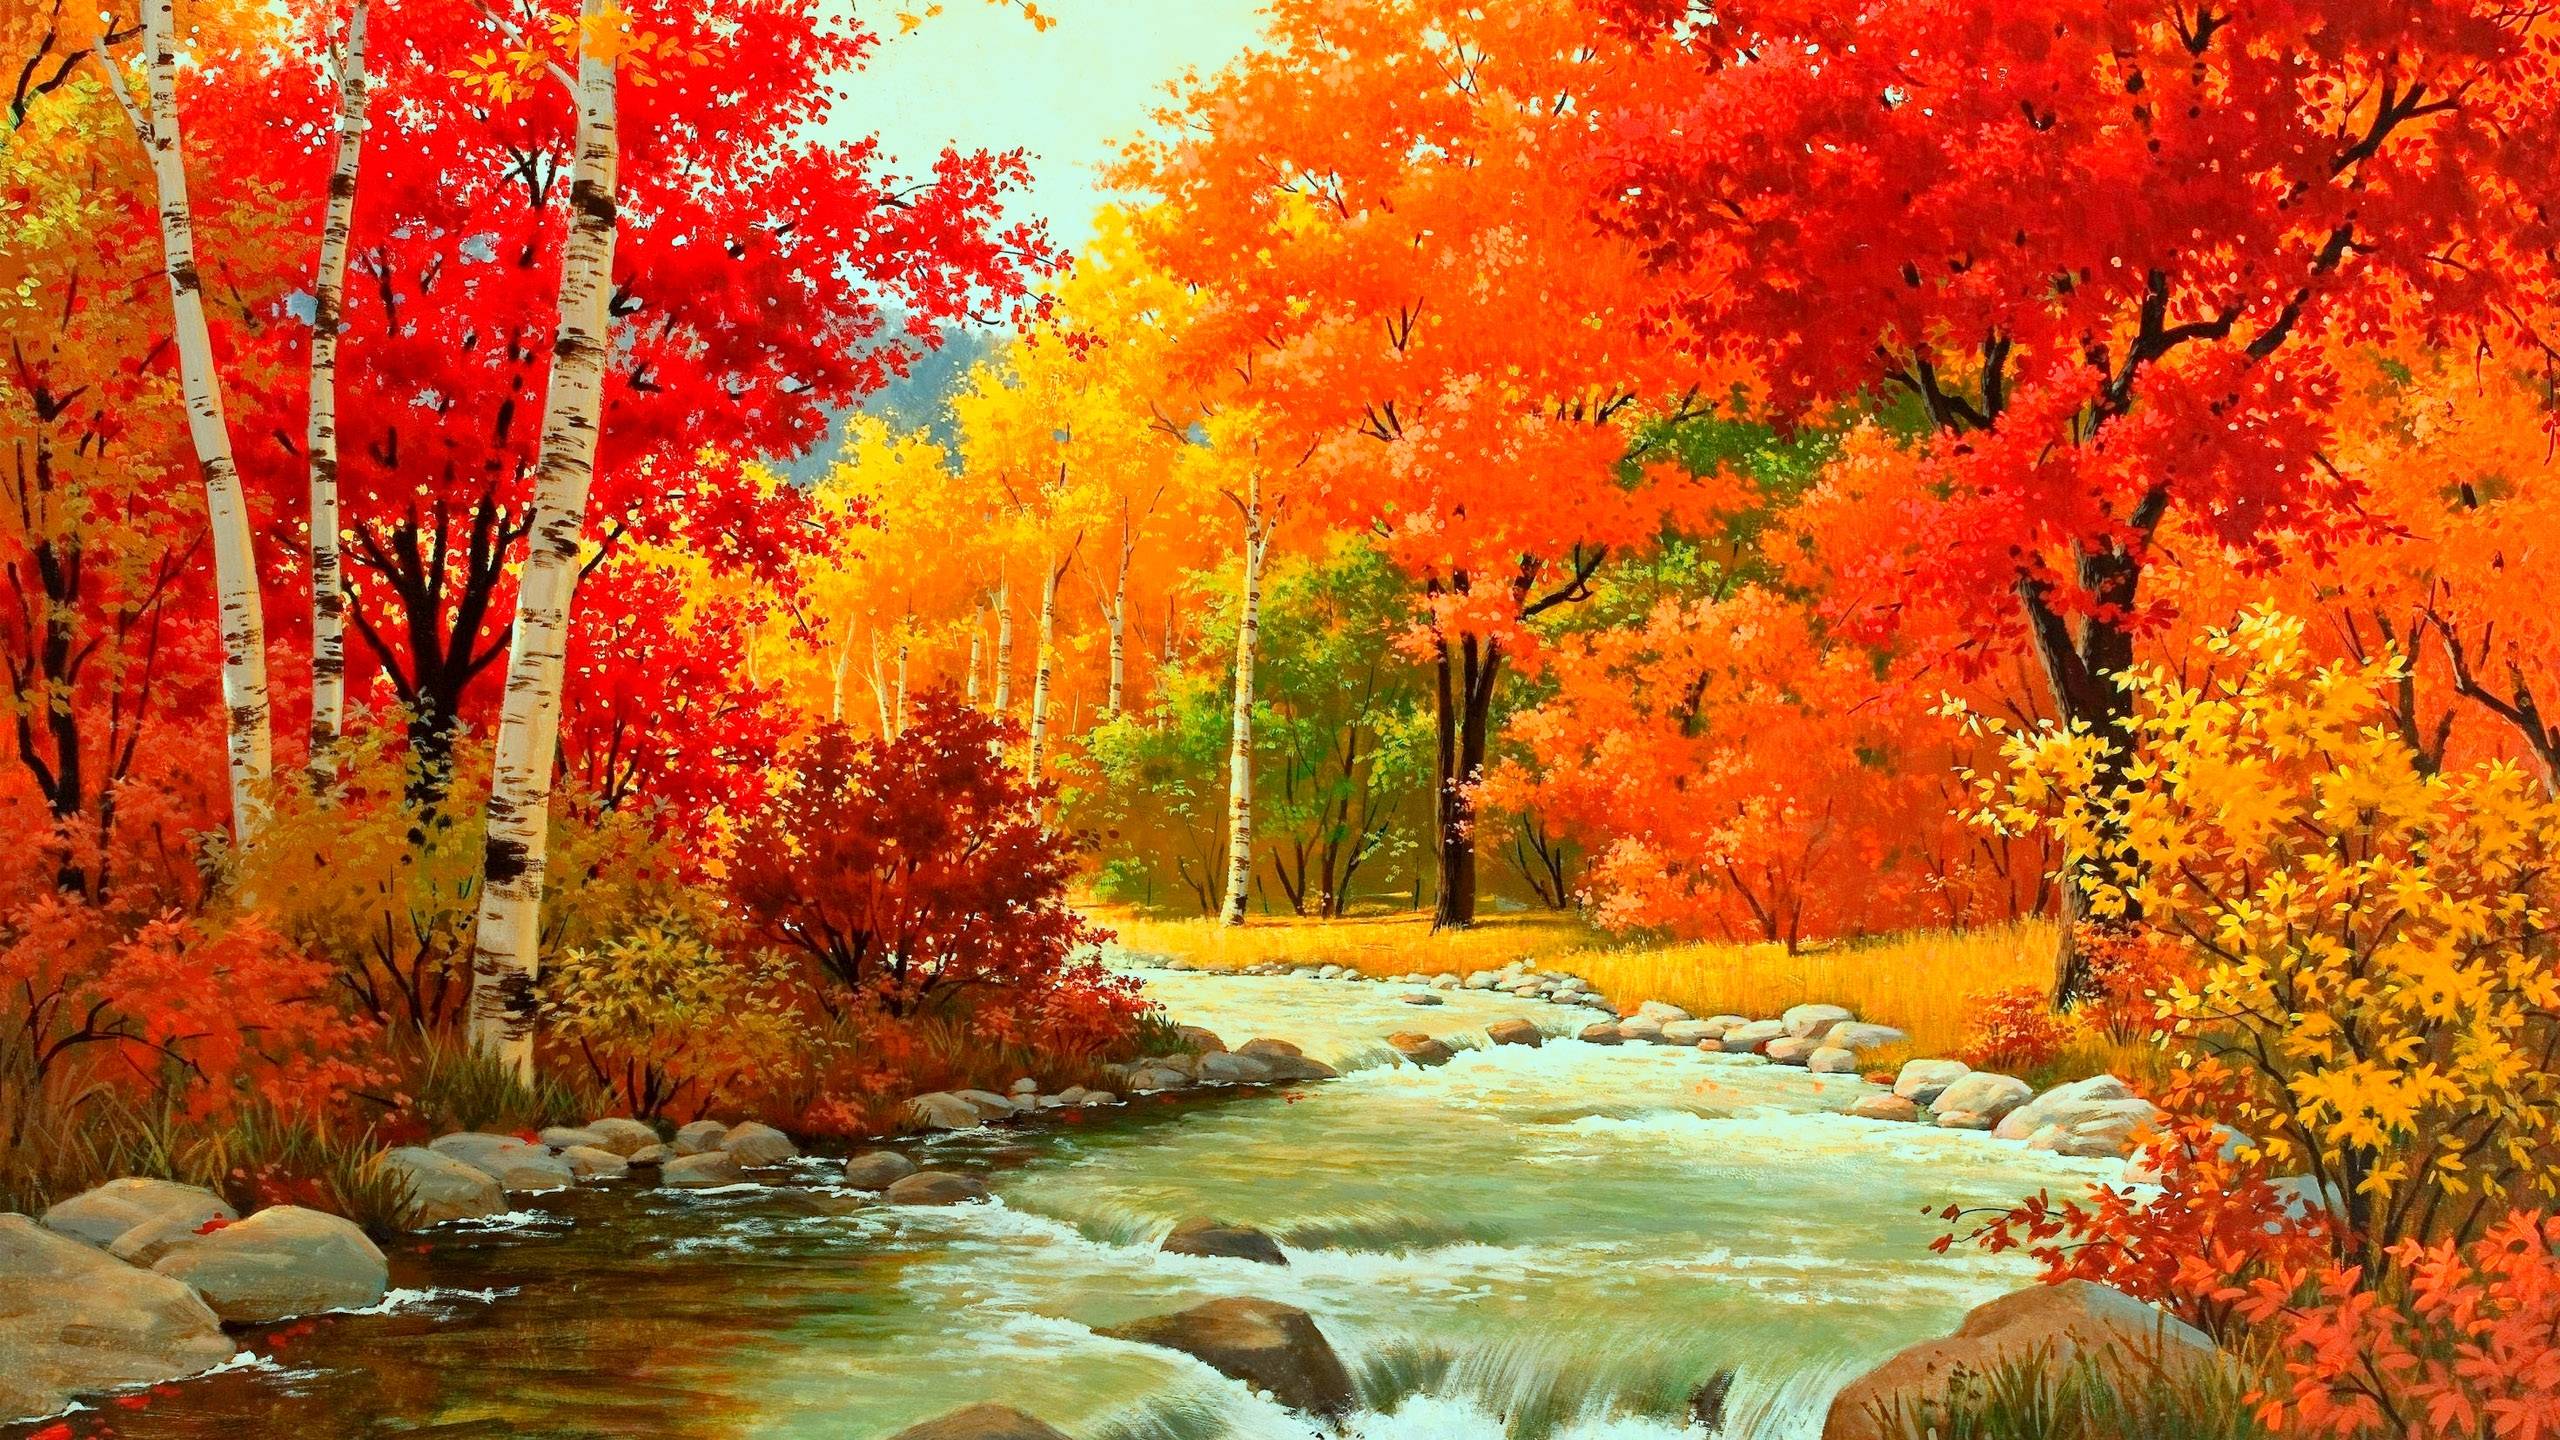 Free download HD Autumn Wallpaper [2560x1440] for your Desktop, Mobile & Tablet. Explore Fall Image Wallpaper. Free Fall Wallpaper For Desktop, Free Autumn Wallpaper, Beautiful Autumn Wallpaper